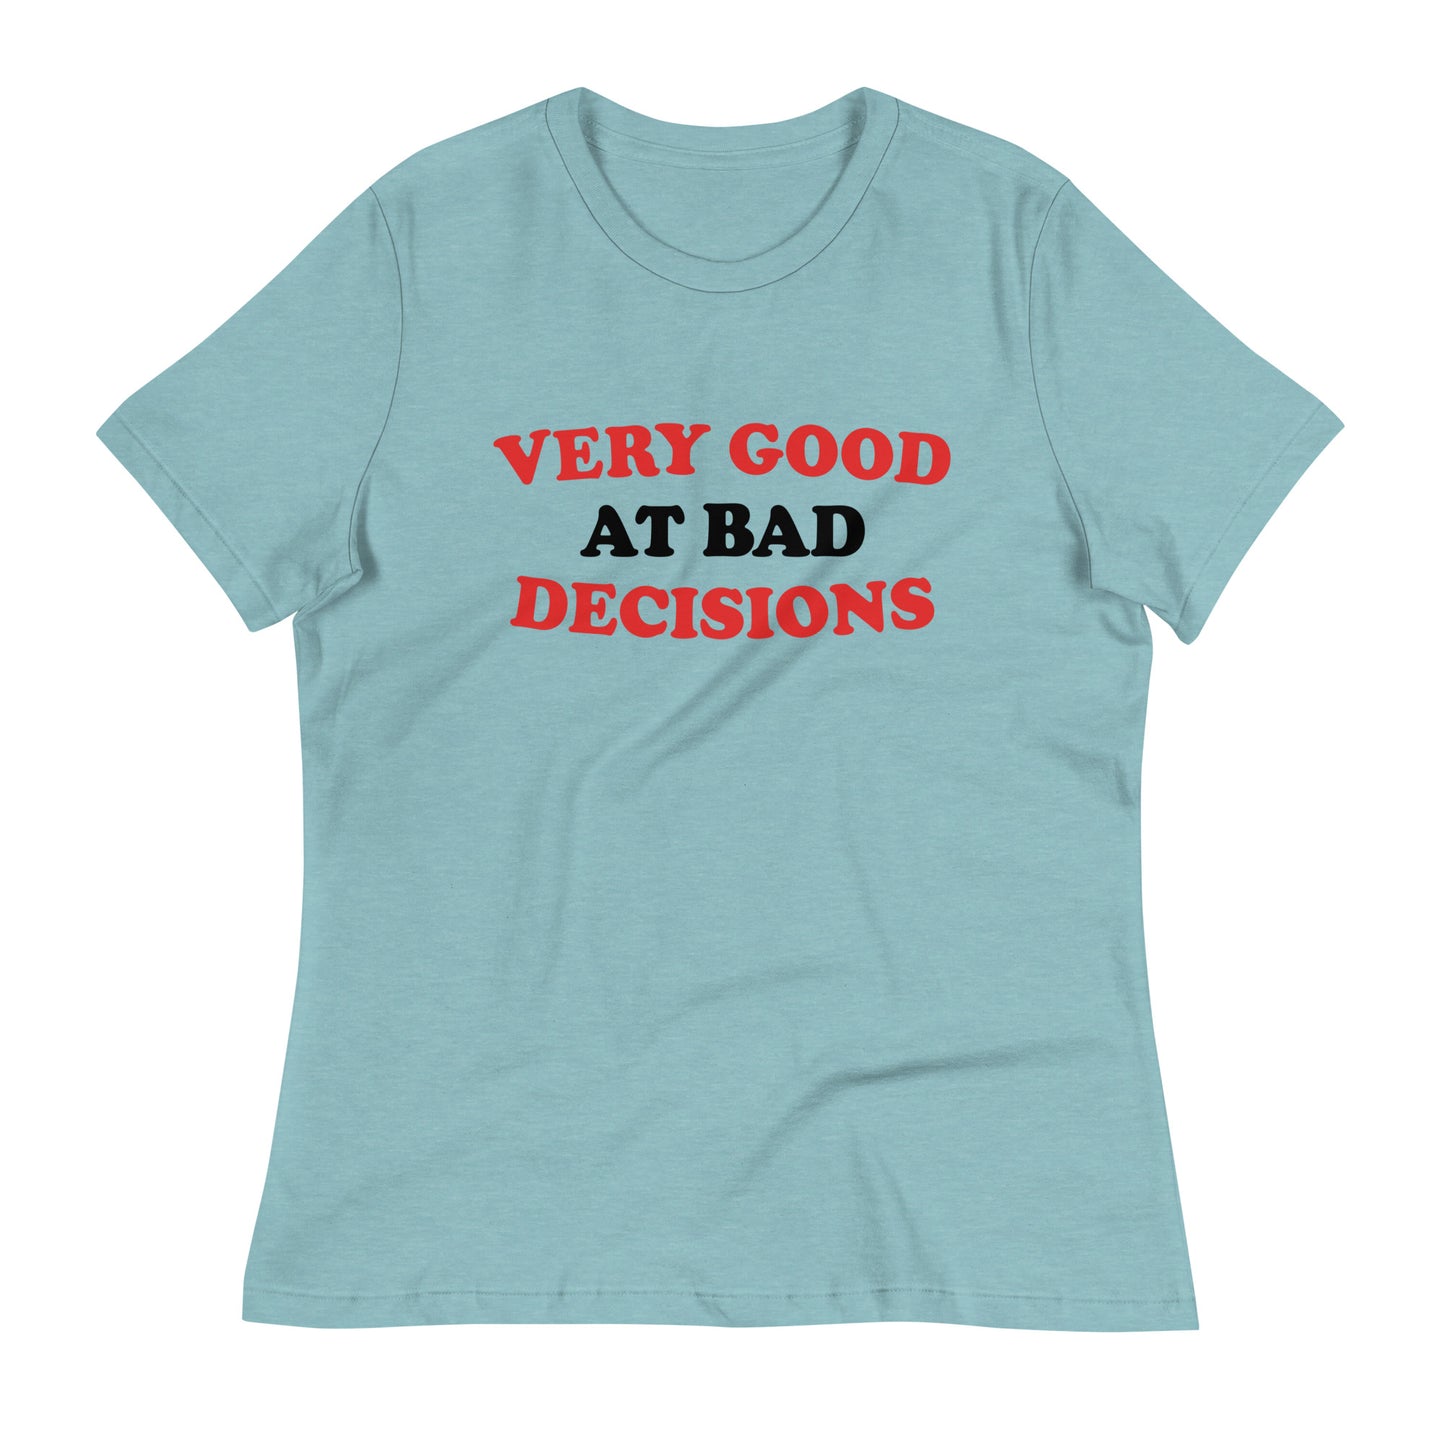 Very Good At Bad Decisions Women's Signature Tee